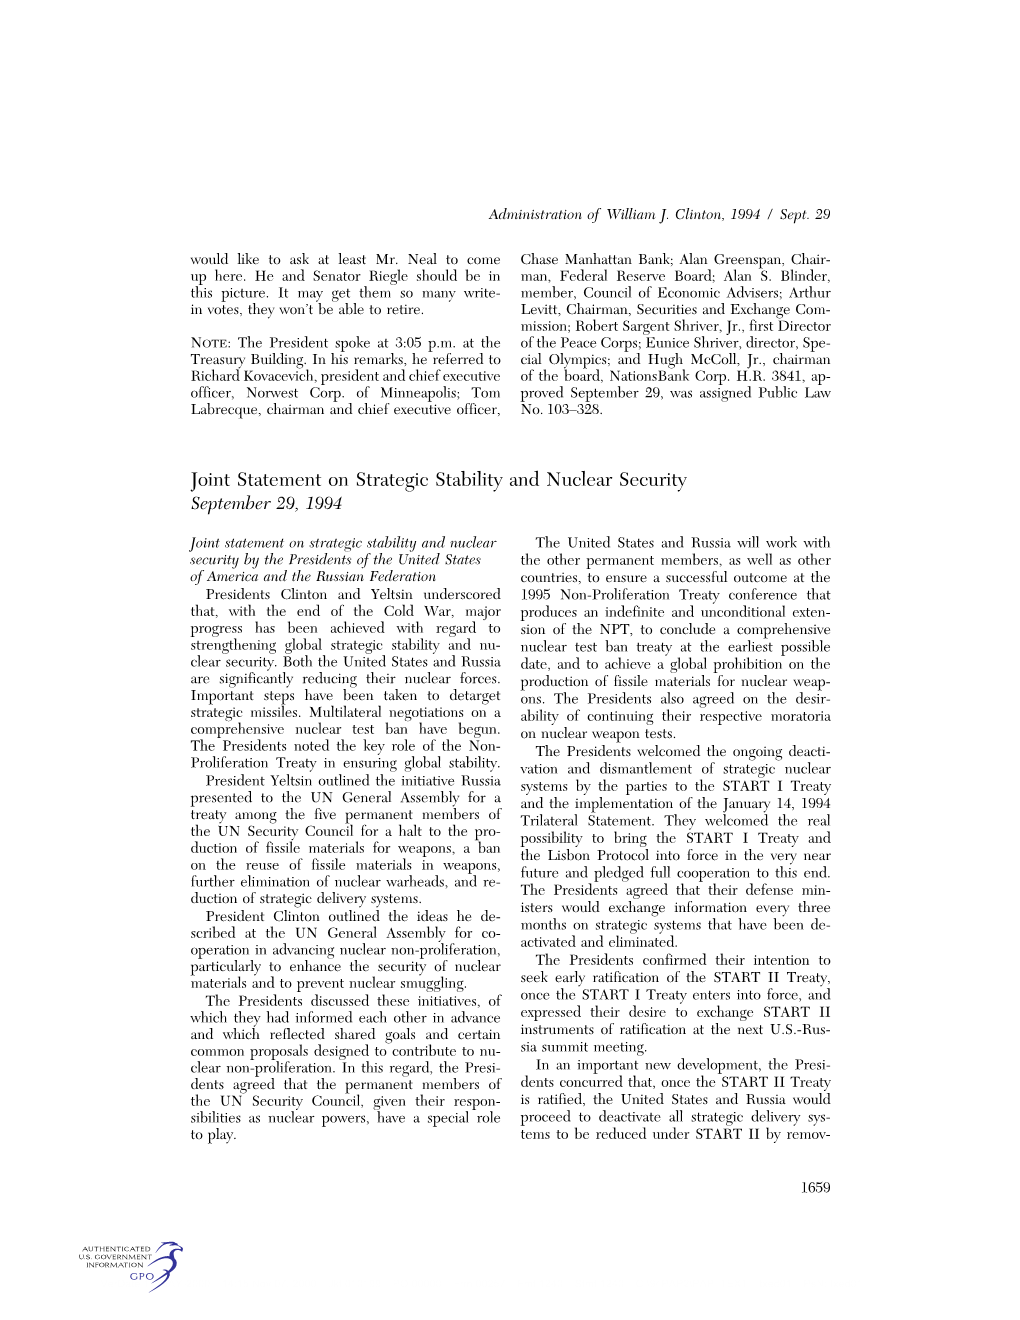 Joint Statement on Strategic Stability and Nuclear Security September 29, 1994